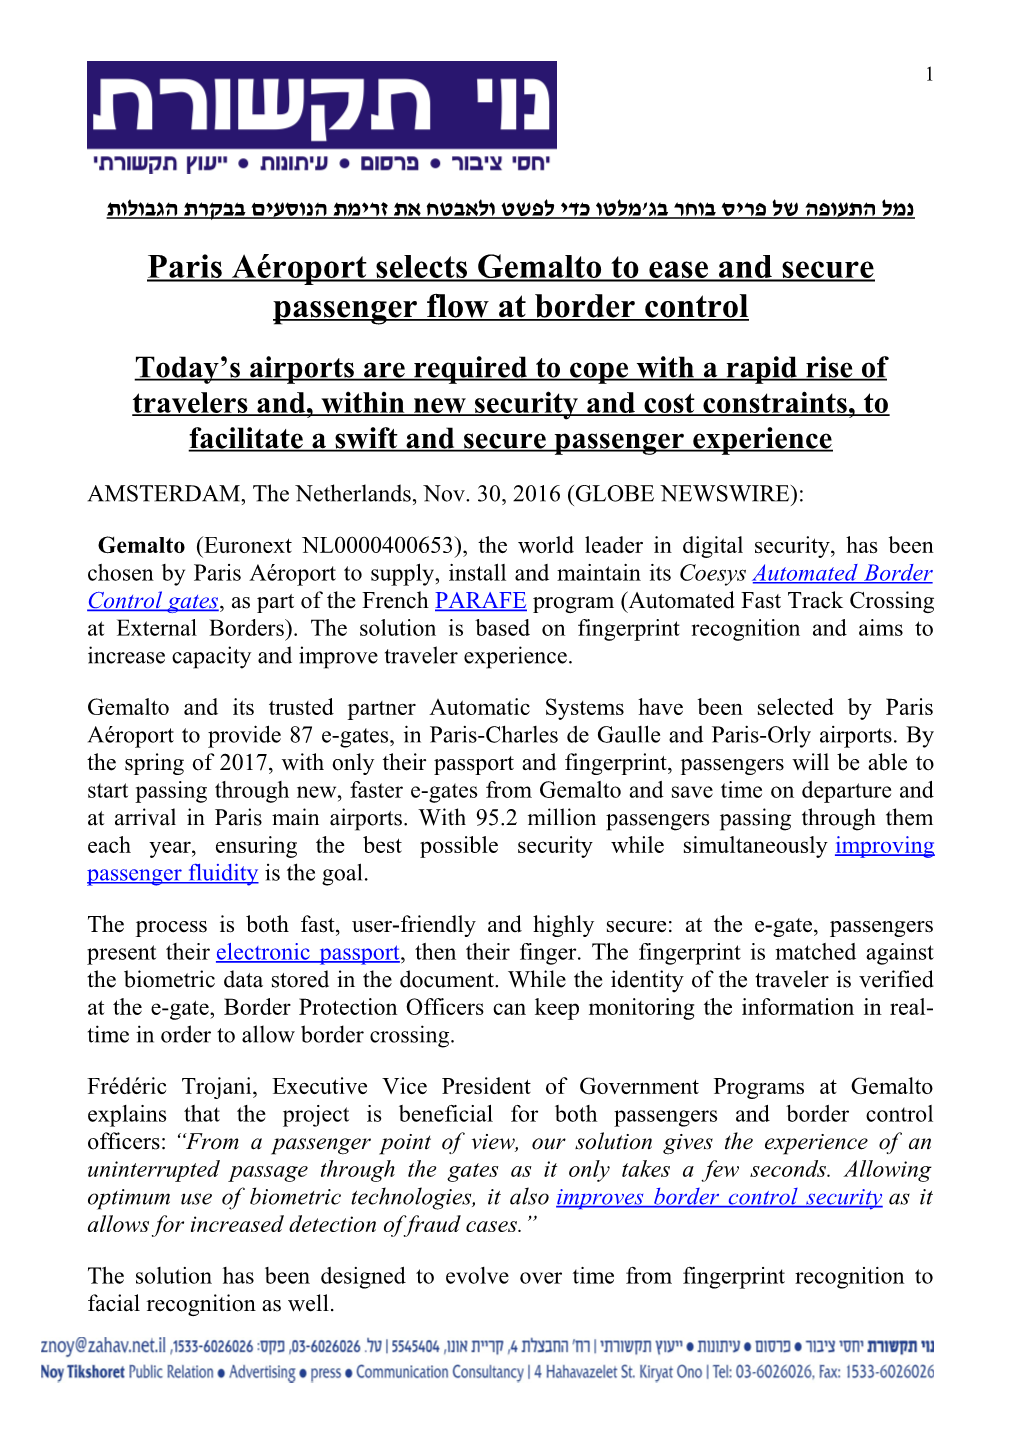 Paris Aéroport Selects Gemalto to Ease and Secure Passenger Flow at Border Control